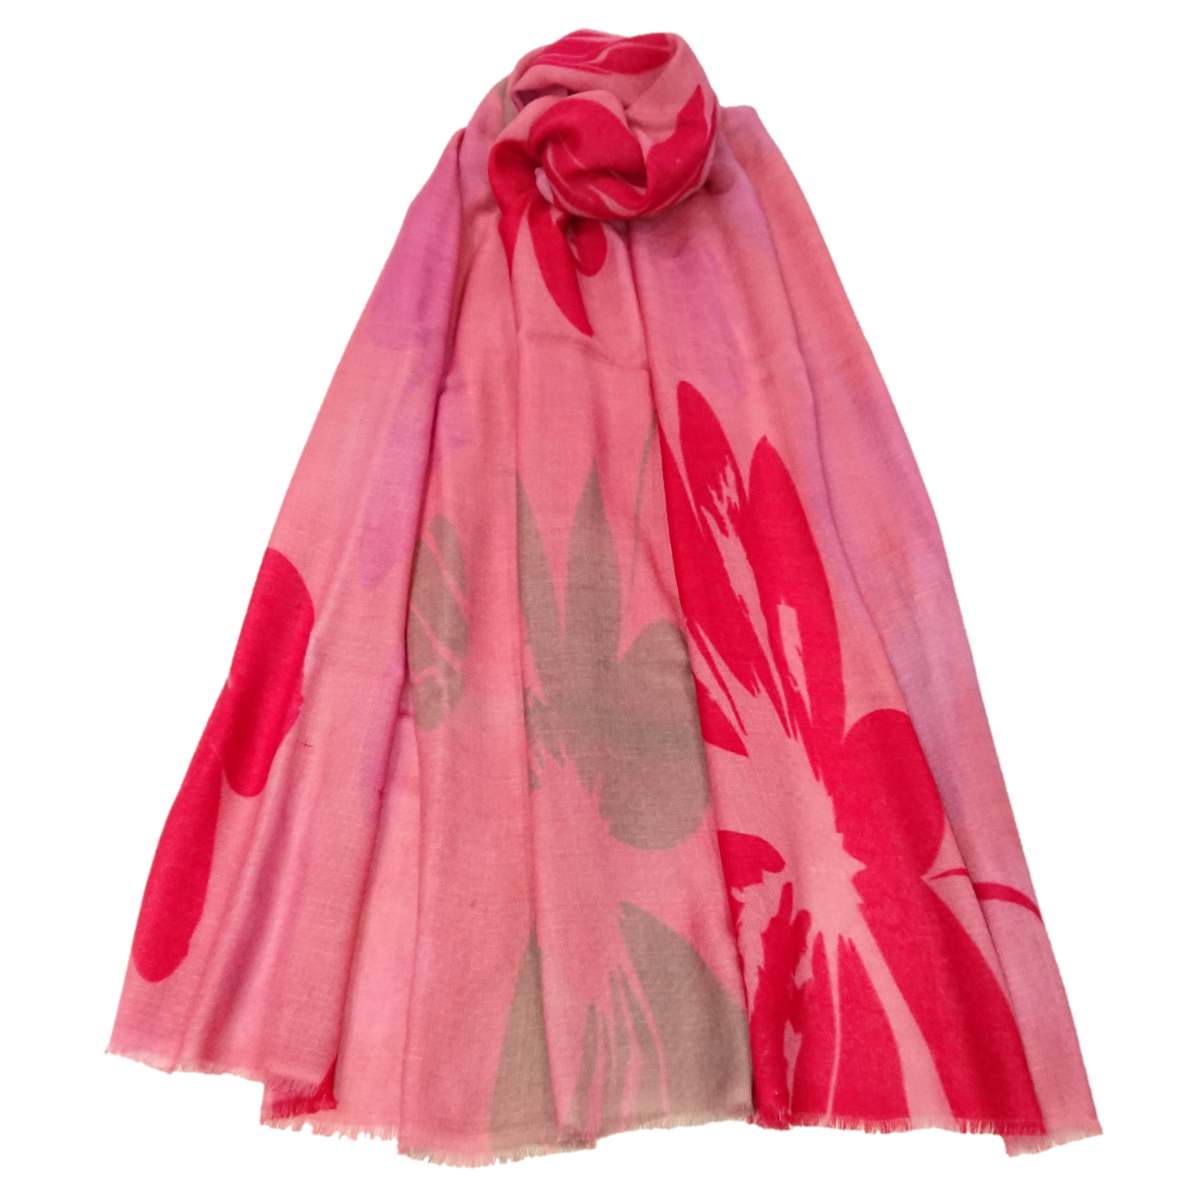 Ltd Edition 100% Pure Pashmina Cashmere Stole - Large Scarf - Vintage Rose with Red Flowers